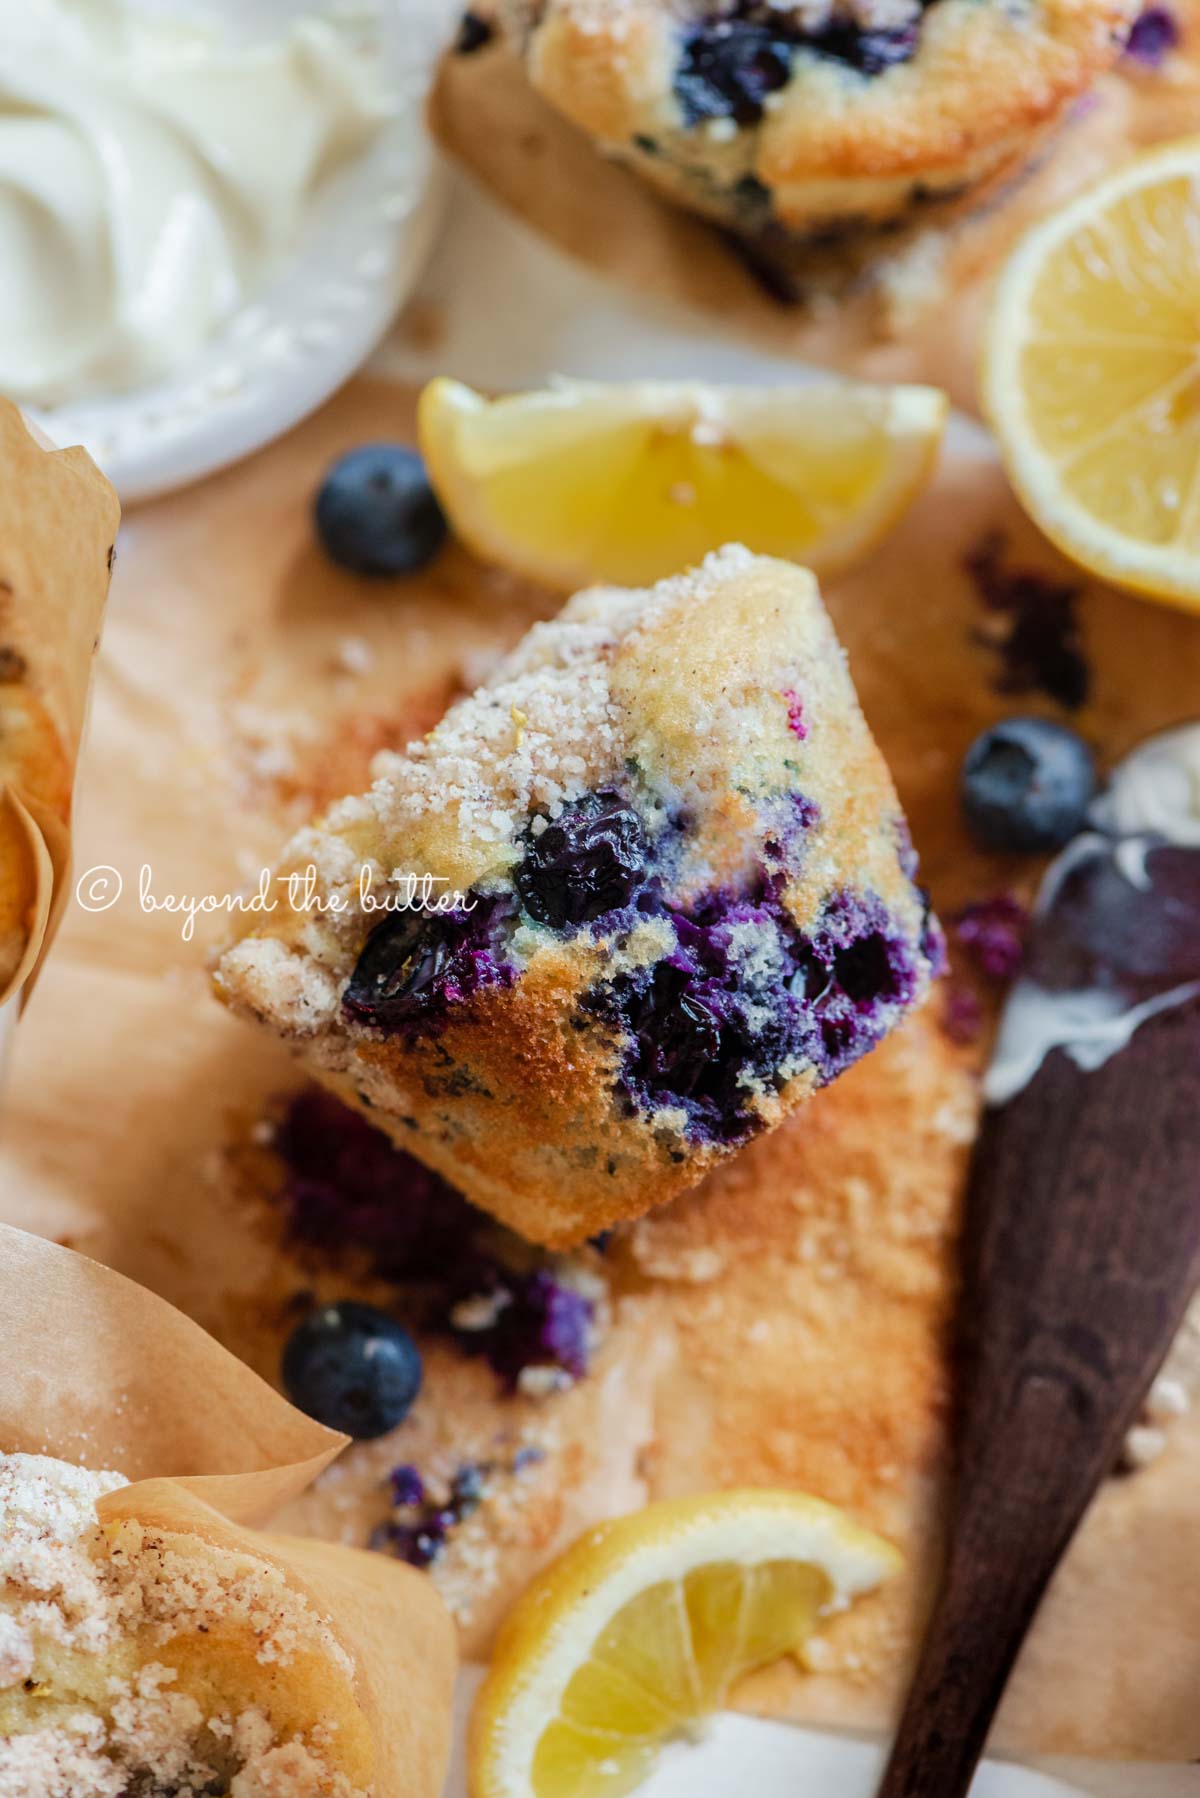 Unwrapped lemon blueberry streusel muffin with small bowl of butter, lemon wedges and blueberries around it | All images © Beyond the Butter®